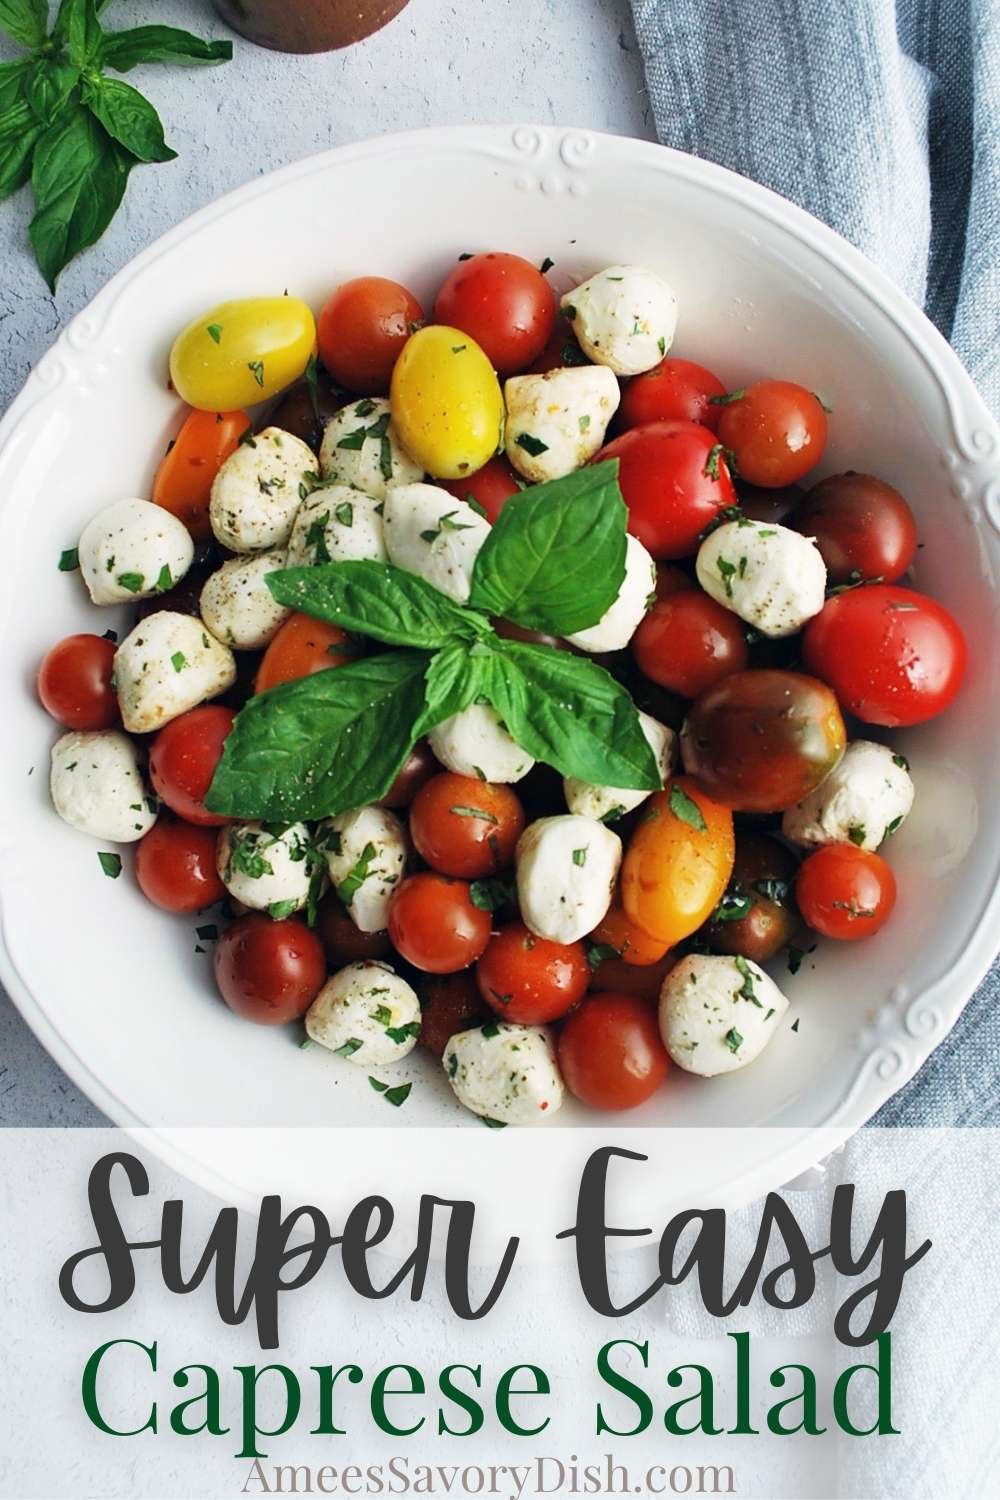 This easy Caprese salad is a healthy summer salad, with cherry tomatoes, basil, and fresh mozzarella cheese topped with a simple Italian vinaigrette. #capresesalad #easysummersidedish via @Ameessavorydish